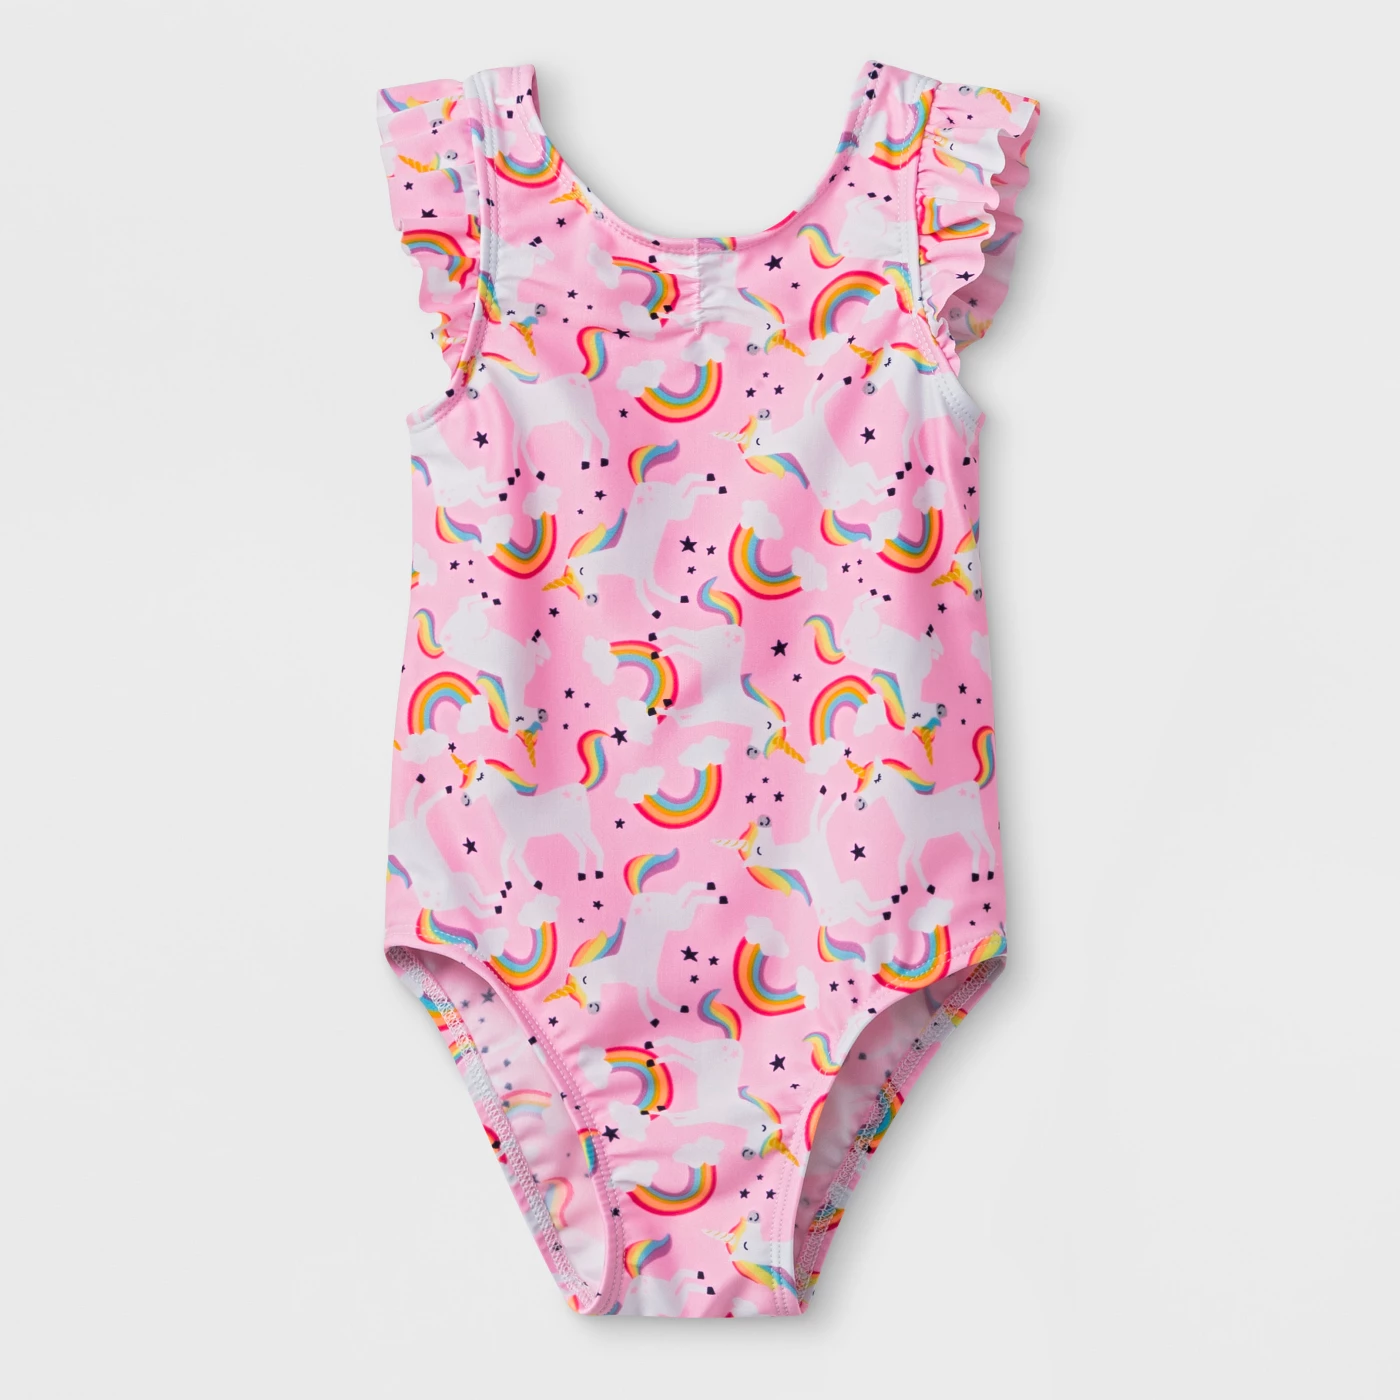 Toddler Girls' Unicorn One Piece Swimsuit - Cat & Jackâ„¢ Pink - image 1 of 2